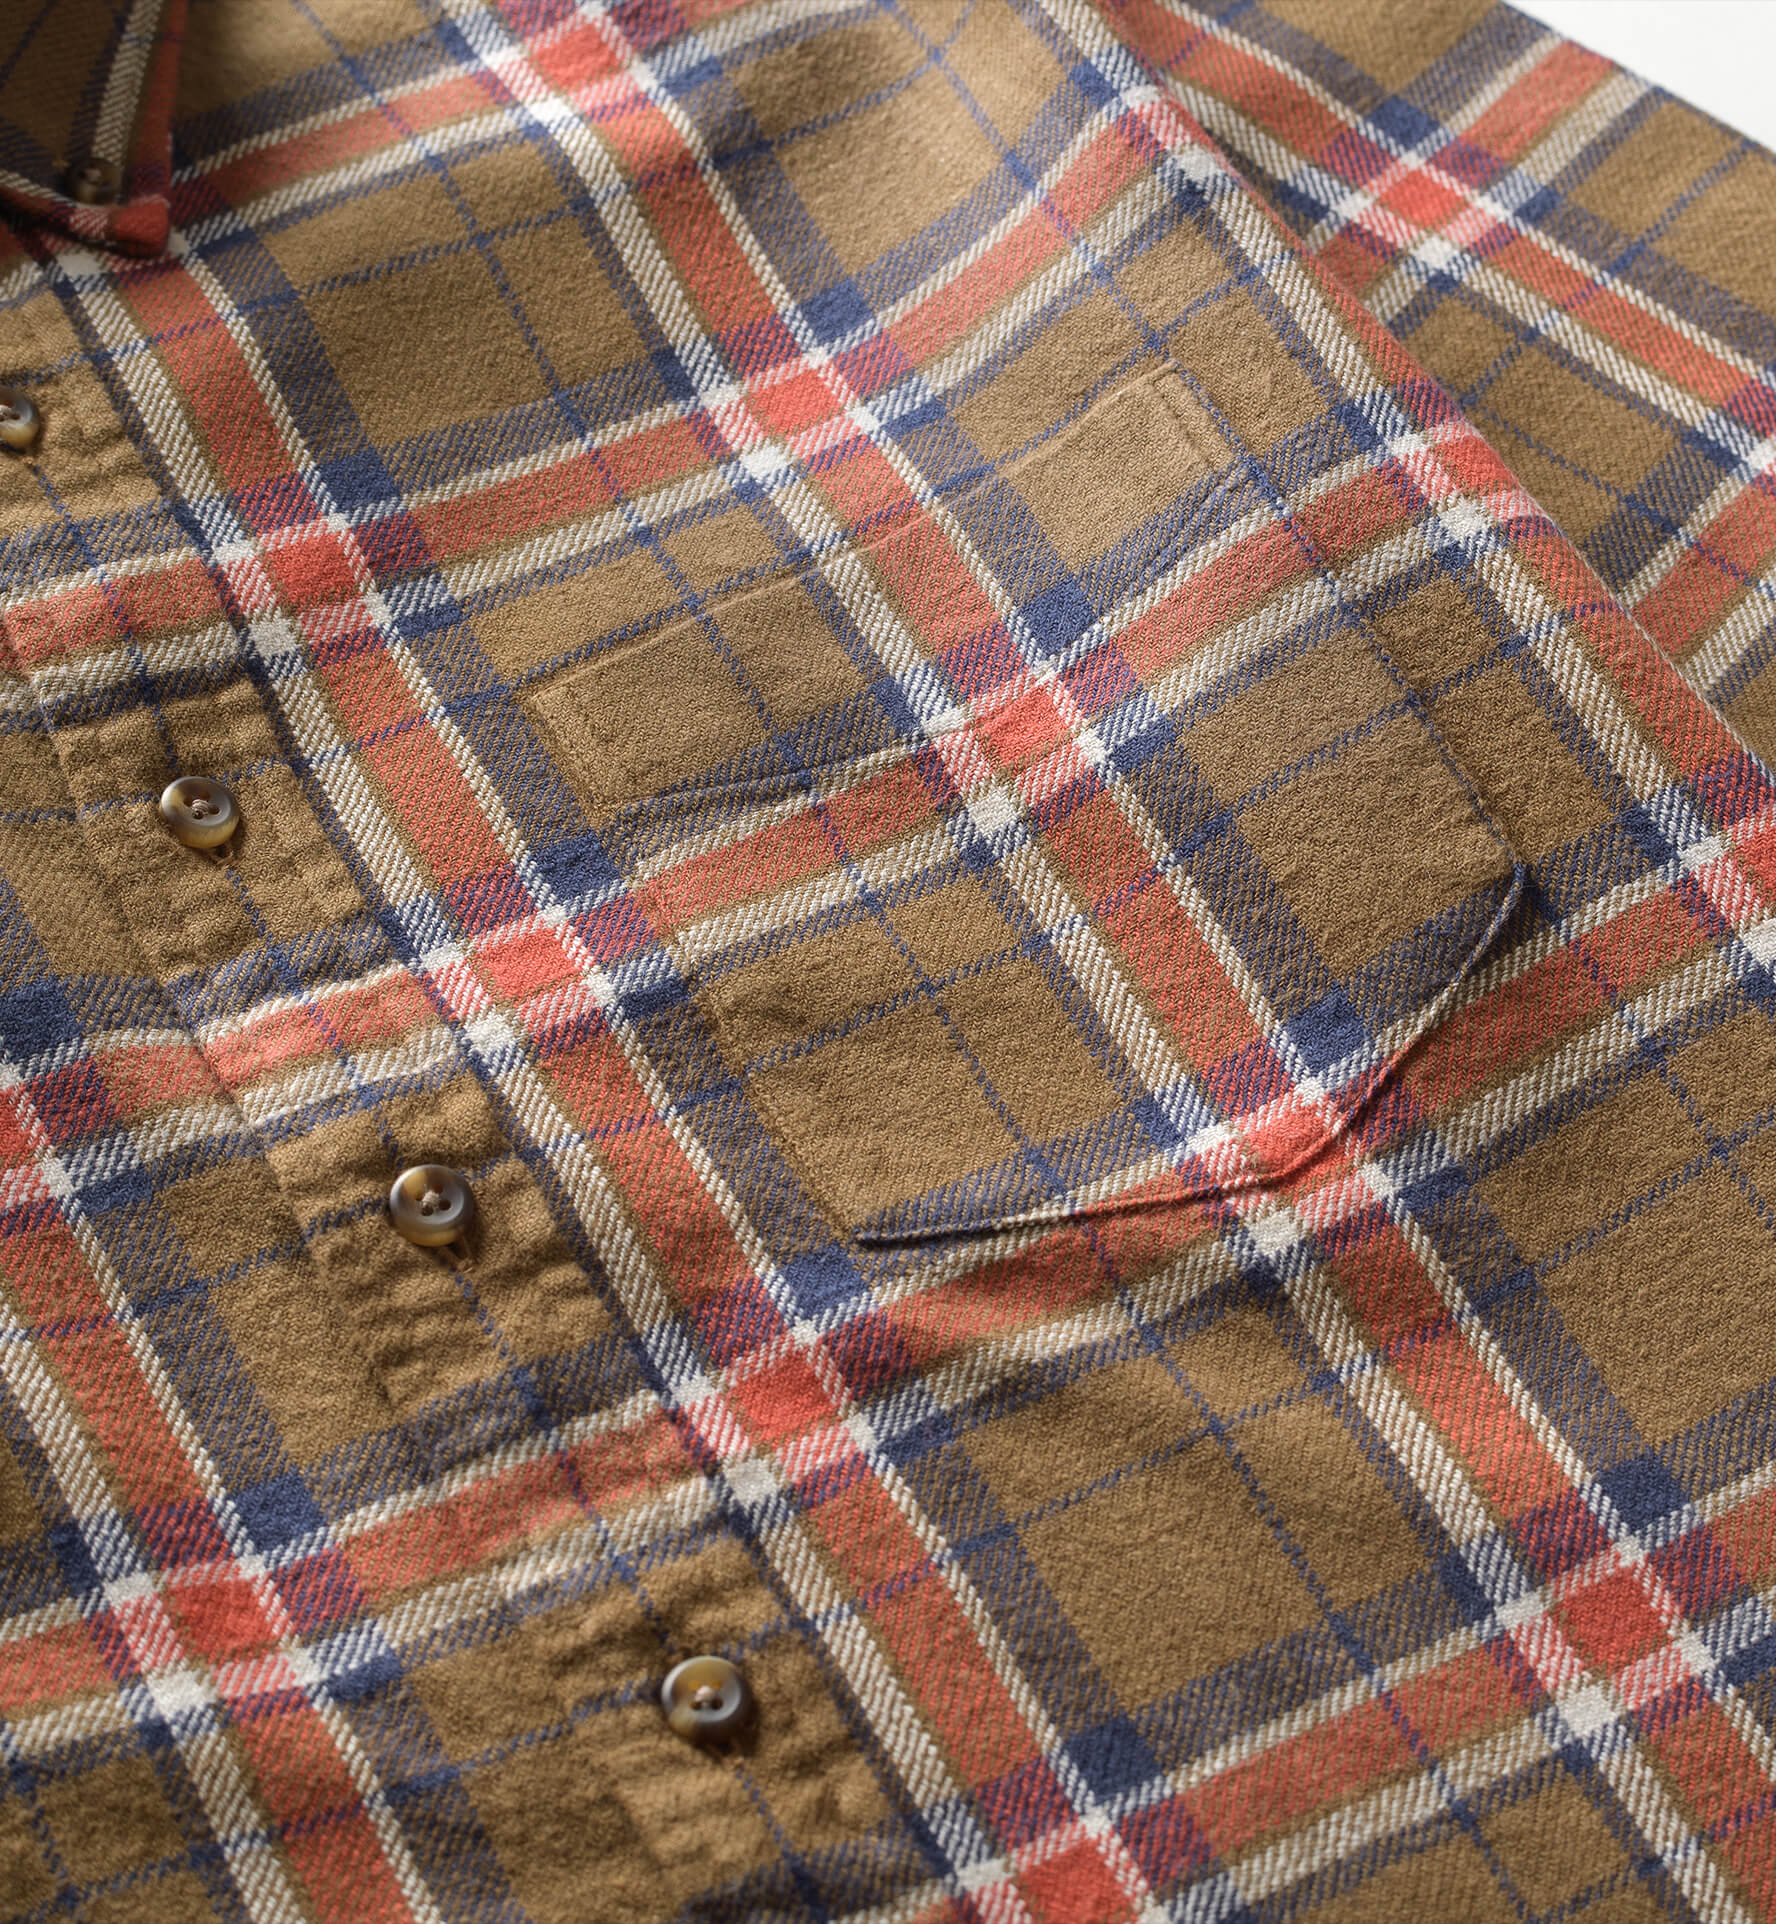 Japanese Washed Brown and Navy Country Plaid by Proper Cloth